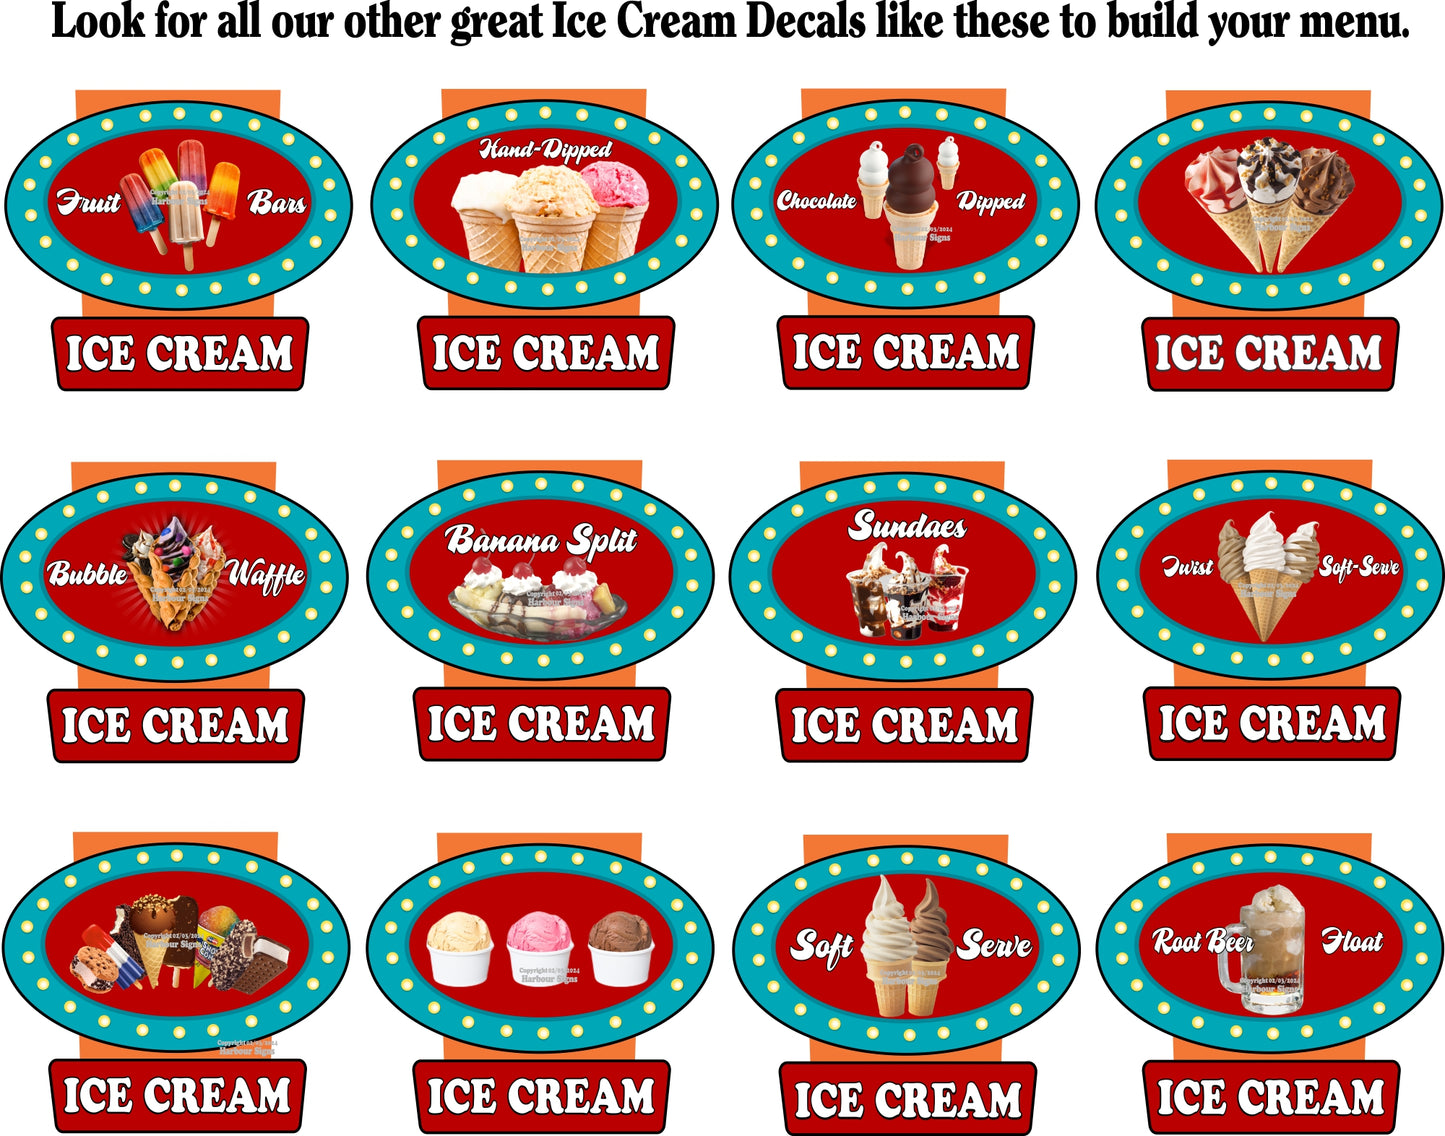 Bubble Waffle Ice Cream Decals Food Truck Concession Vinyl Sticker v